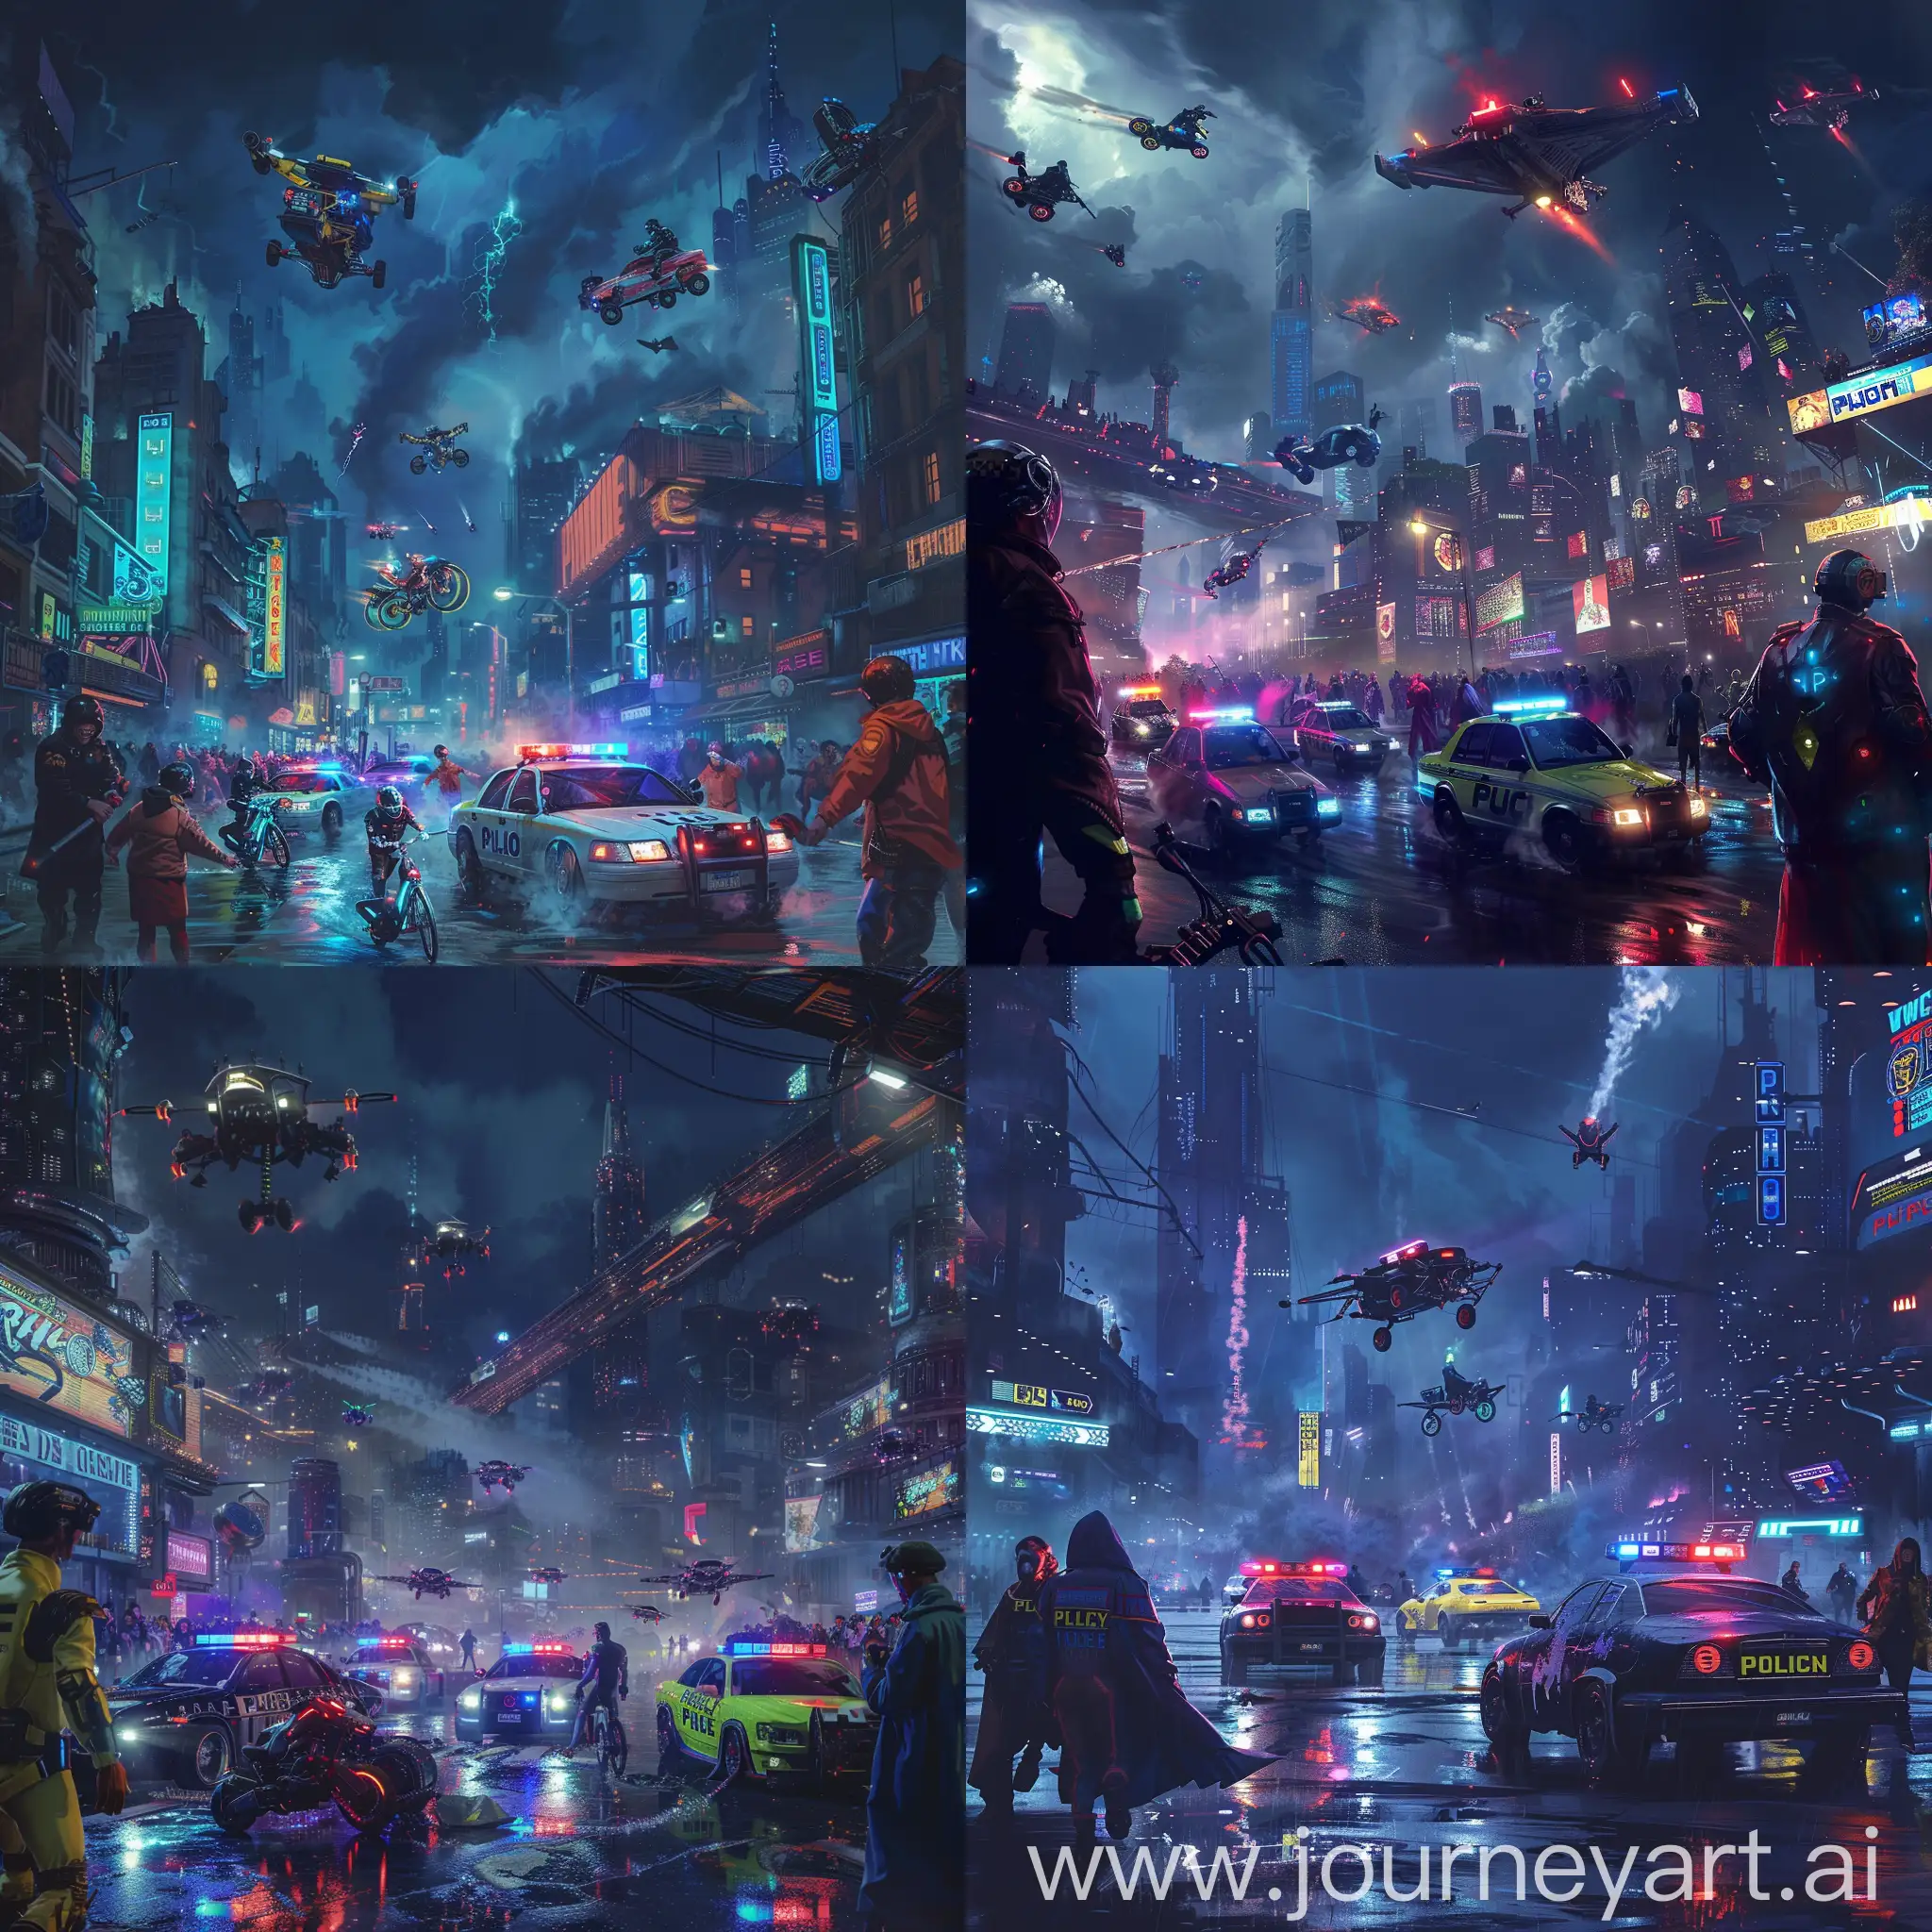 Futuristic-Cyberpunk-Cityscape-with-NeonClad-Citizens-and-Aerial-Pursuit